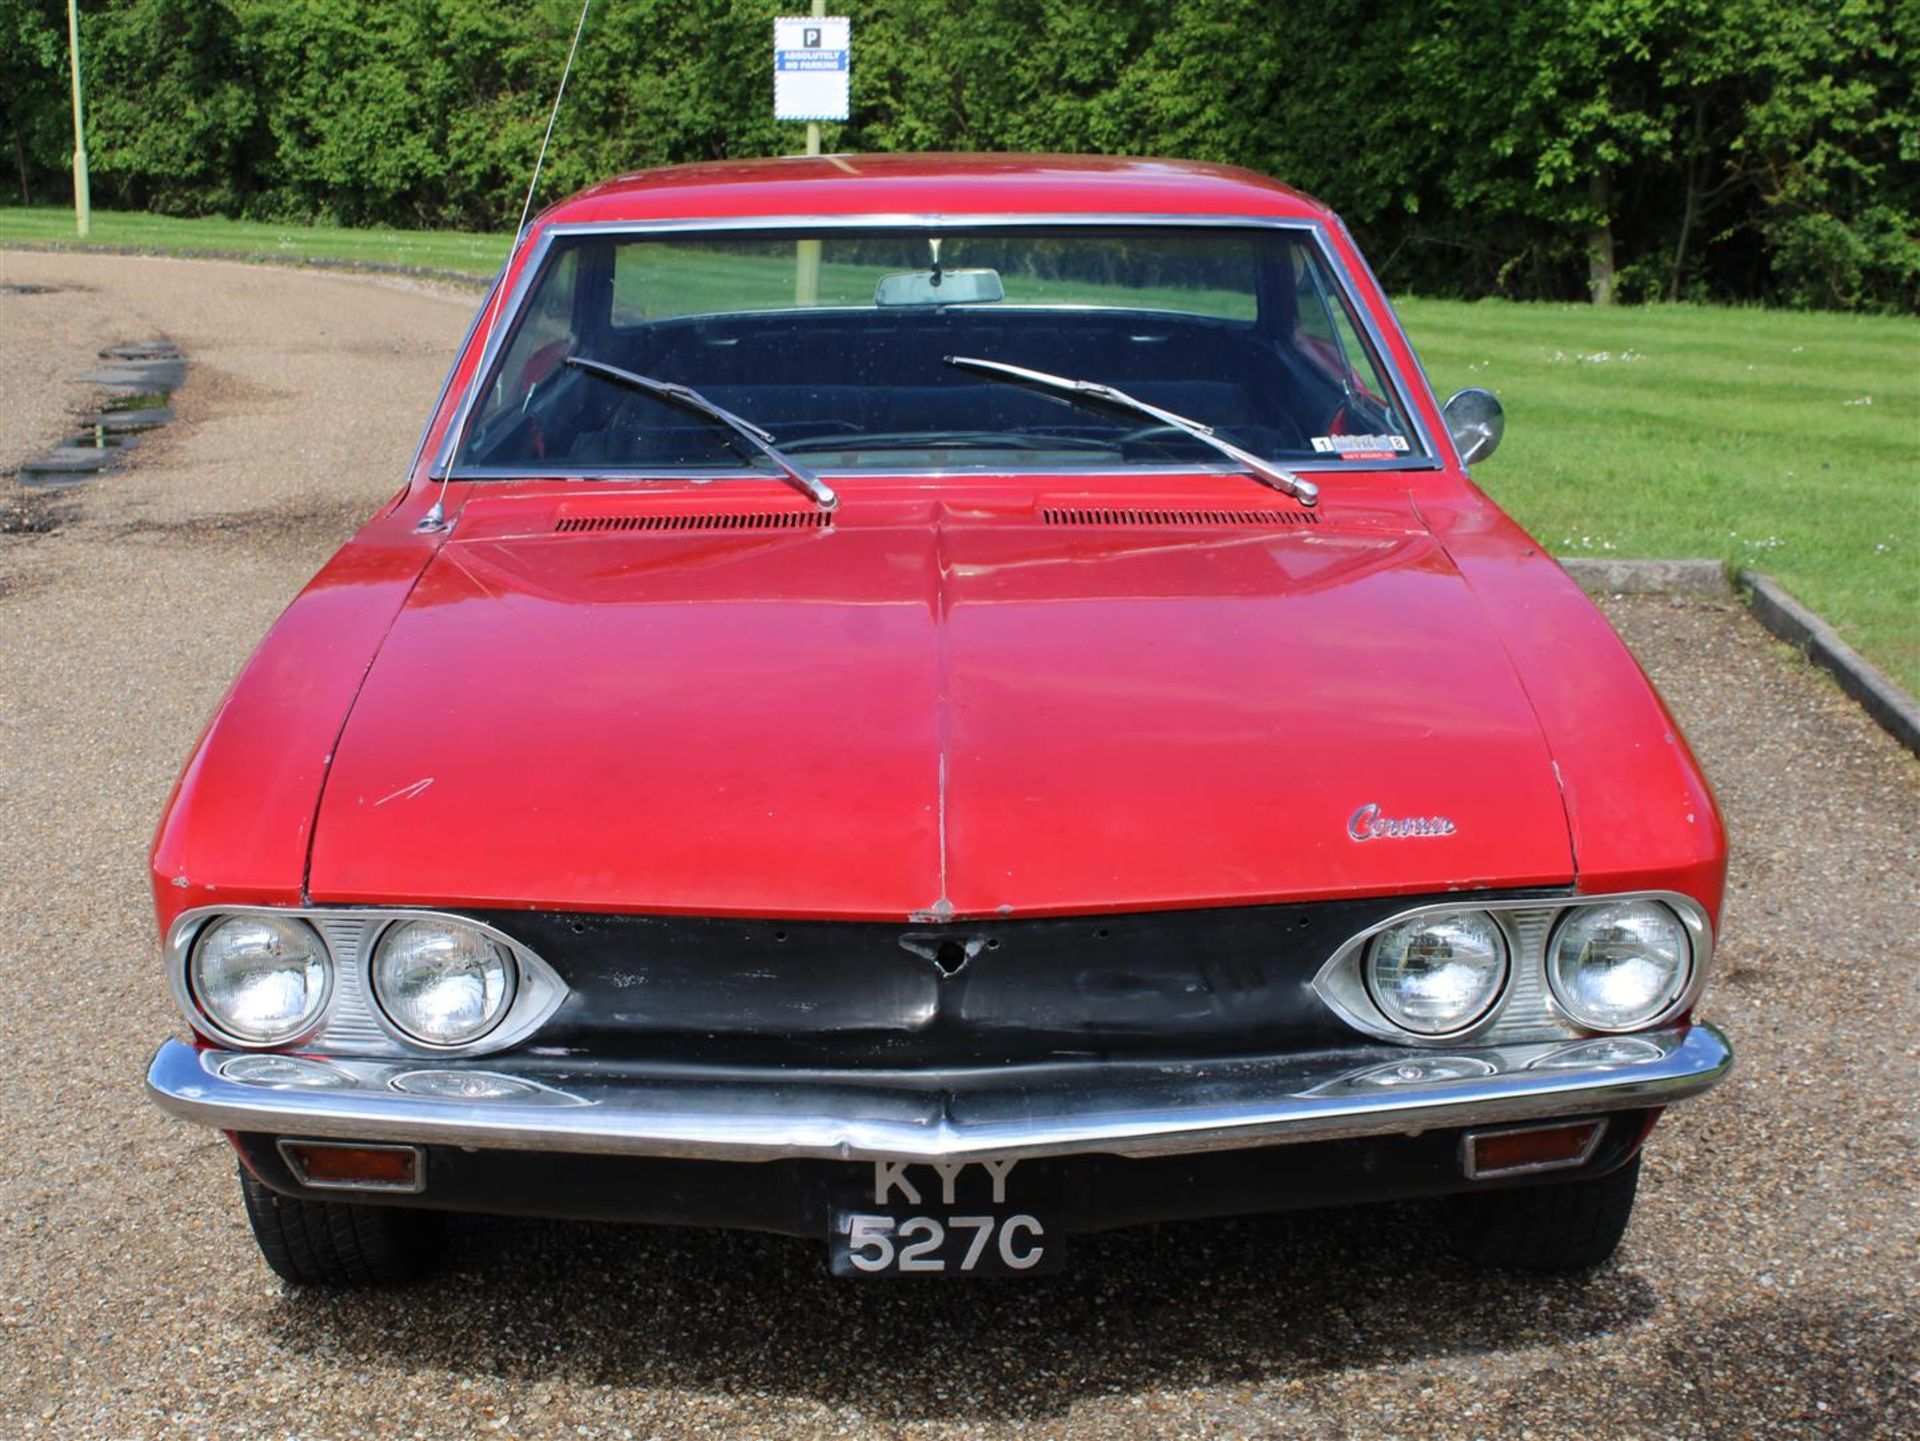 1965 Chevrolet Corvair Corsa Coupe 180HP Turbo LHD - Image 6 of 16